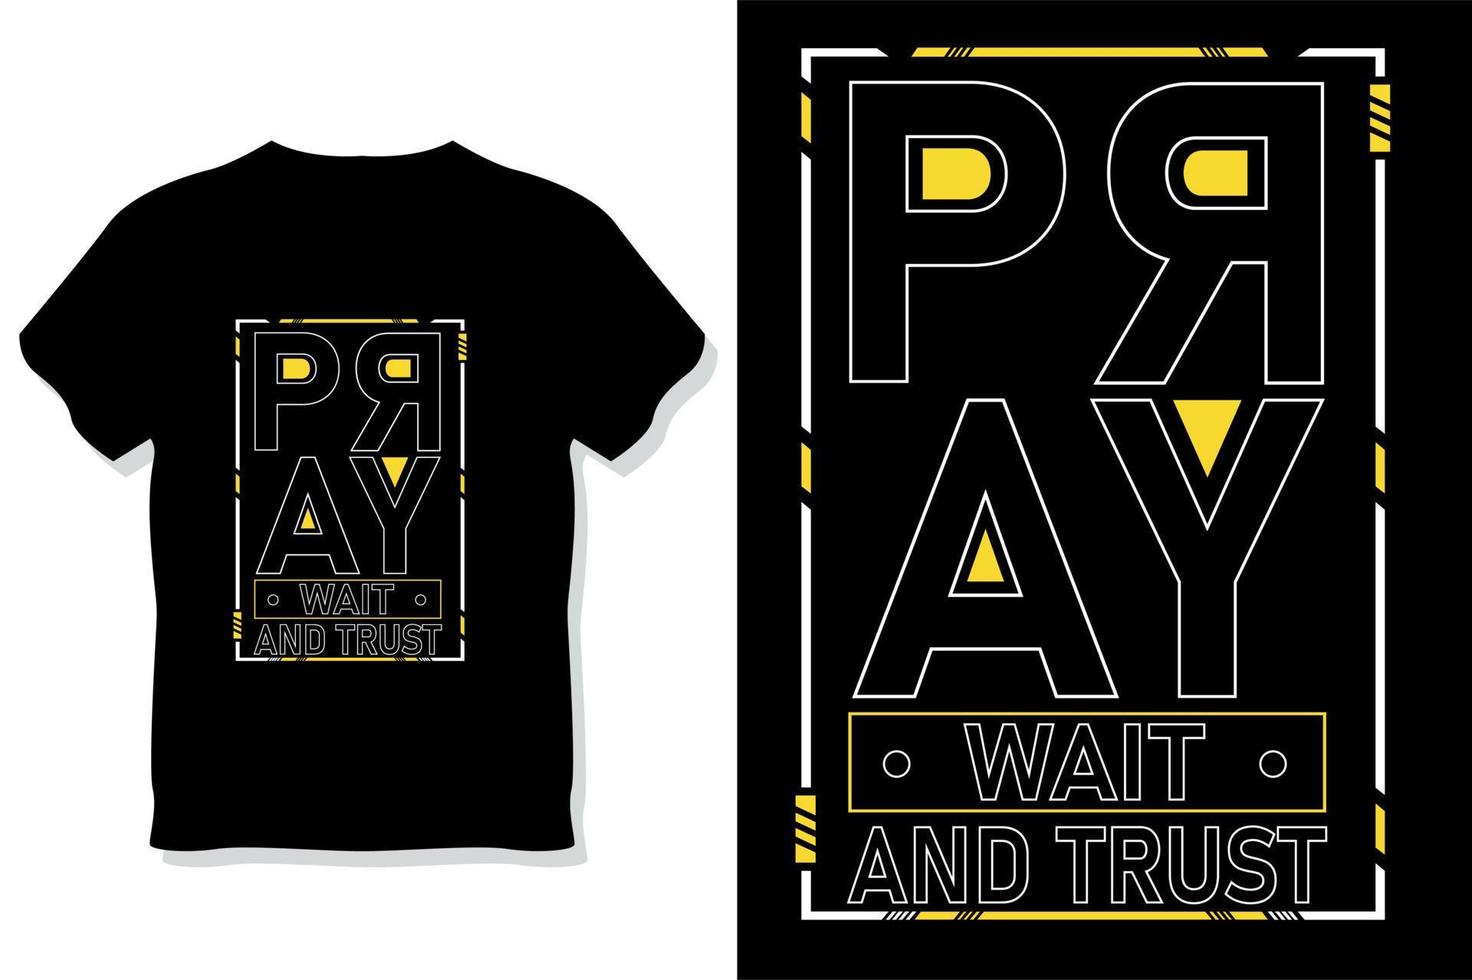 pray wait and trust  motivational quotes typography t shirt design vector